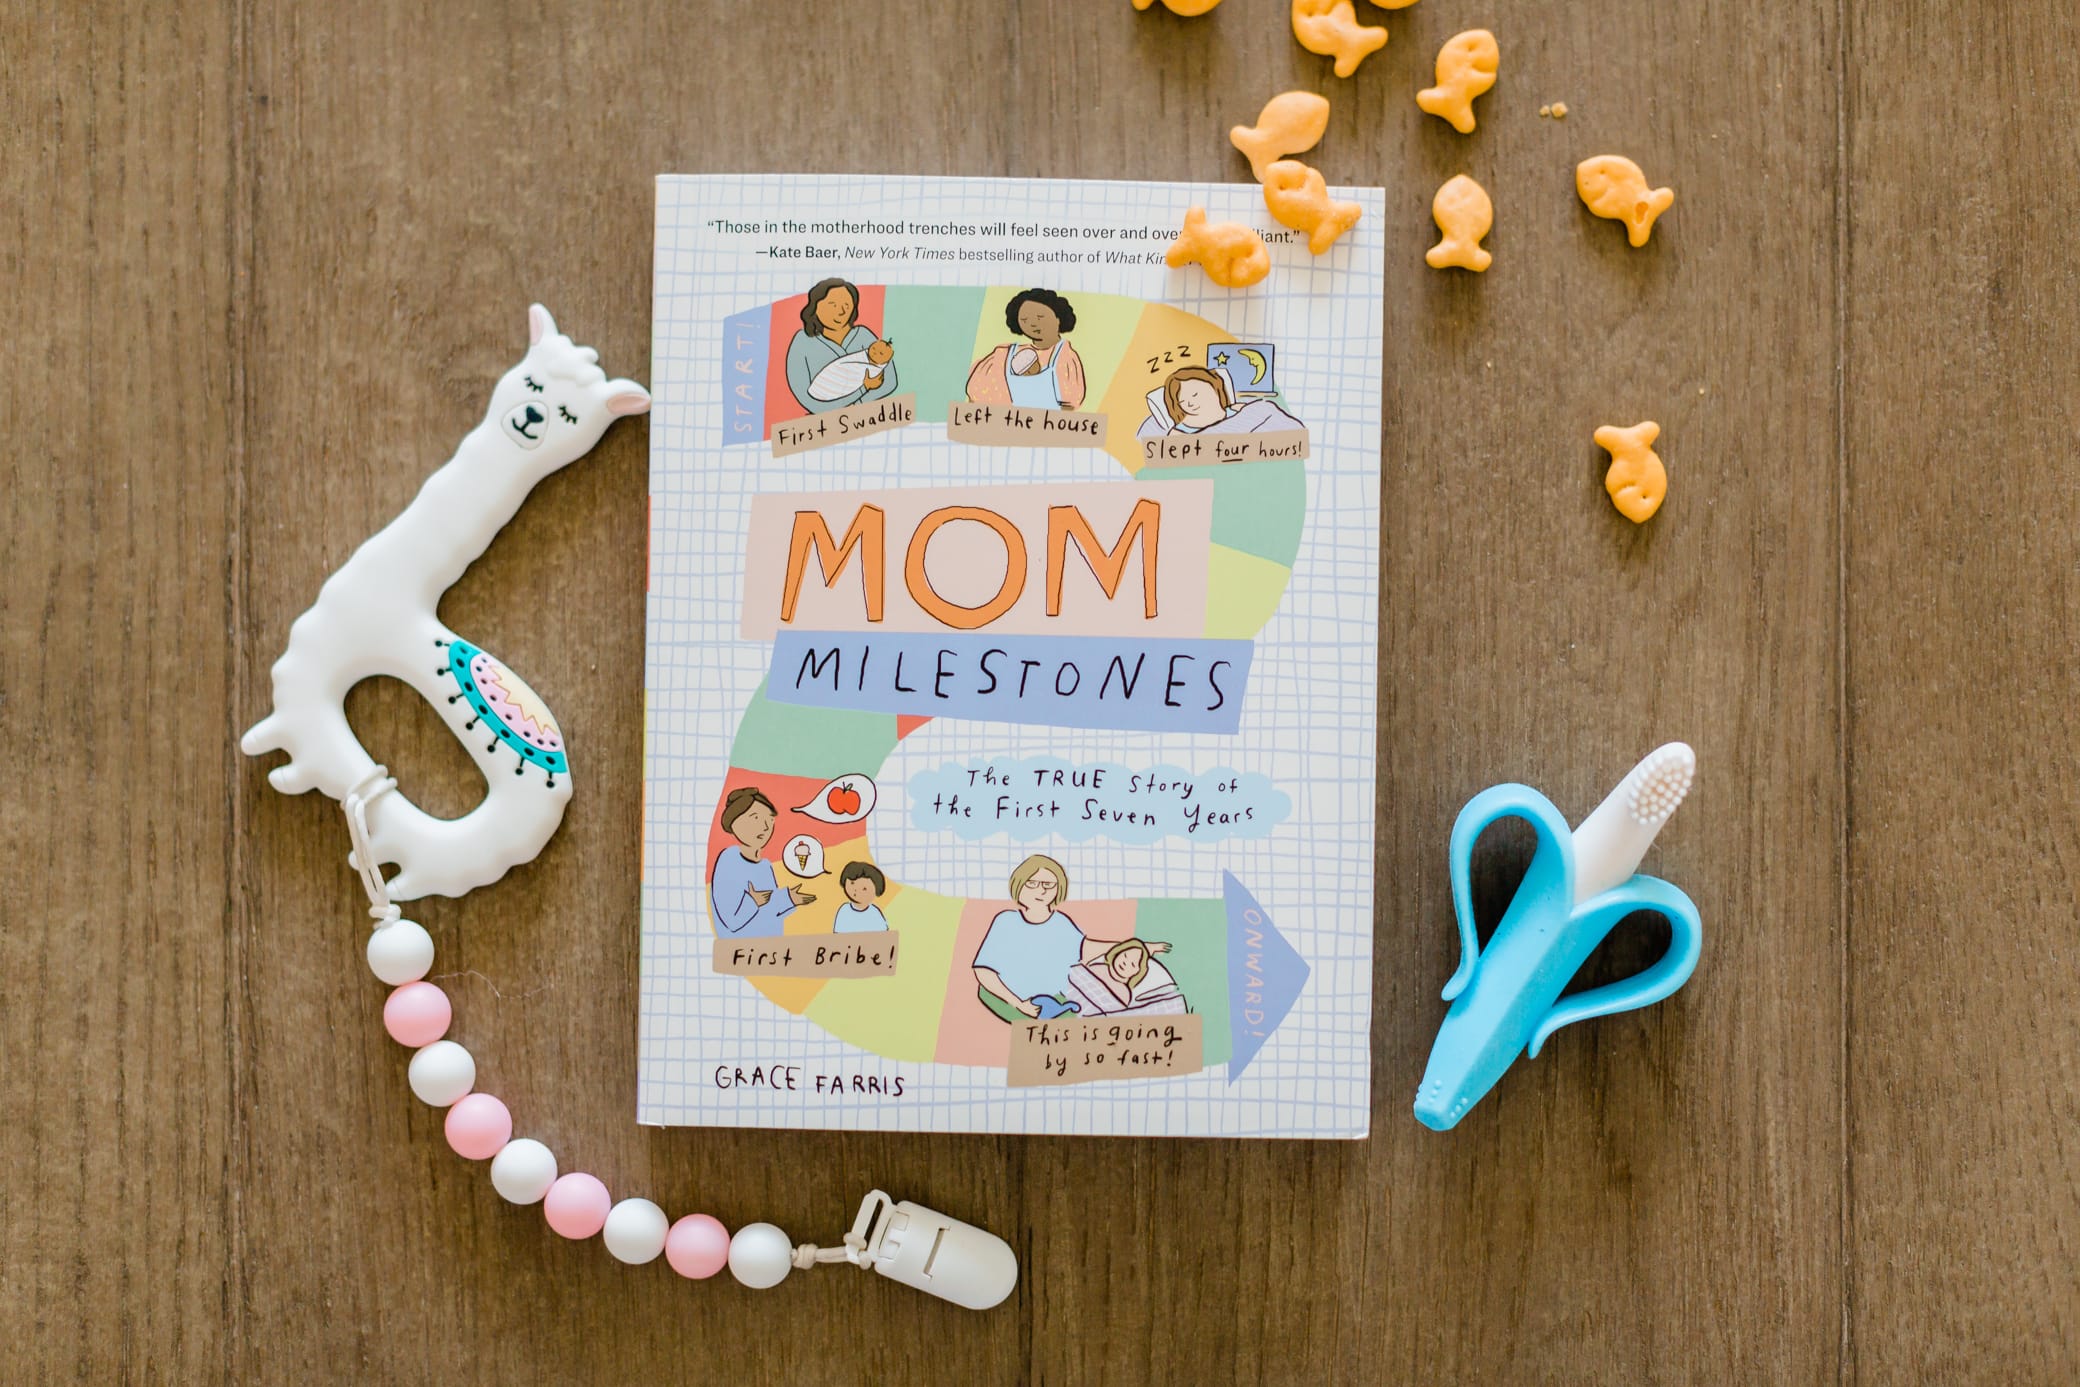 Mom milestones book on a table with some goldfish crackers, a teether, and pacifier clip laying next to it.